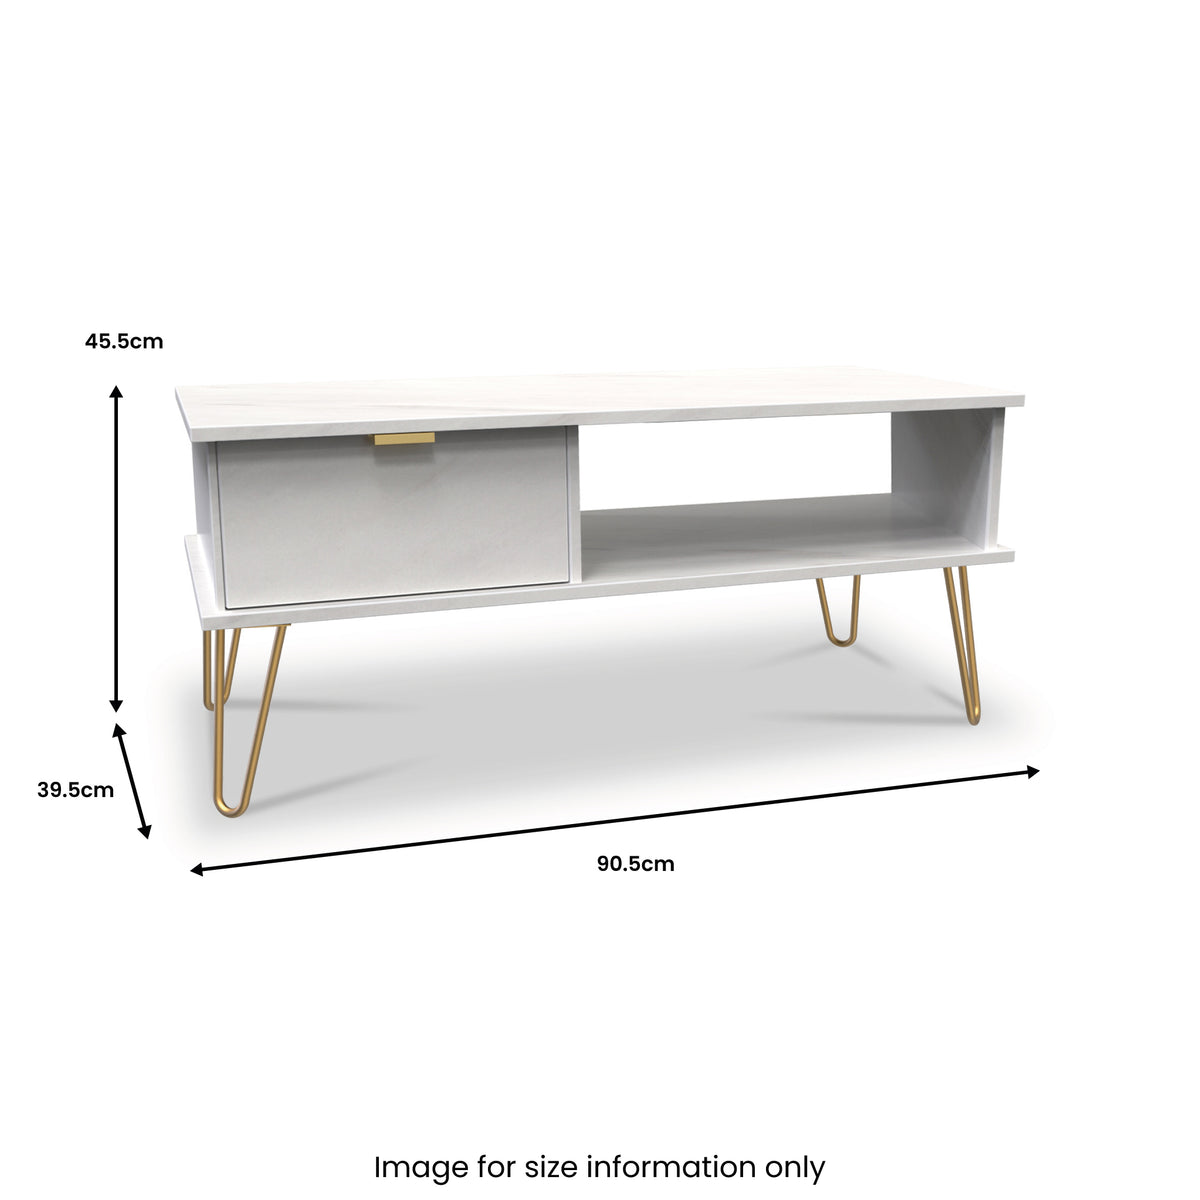 Moreno White Marble 1 Drawer Coffee Table from Roseland Furniture